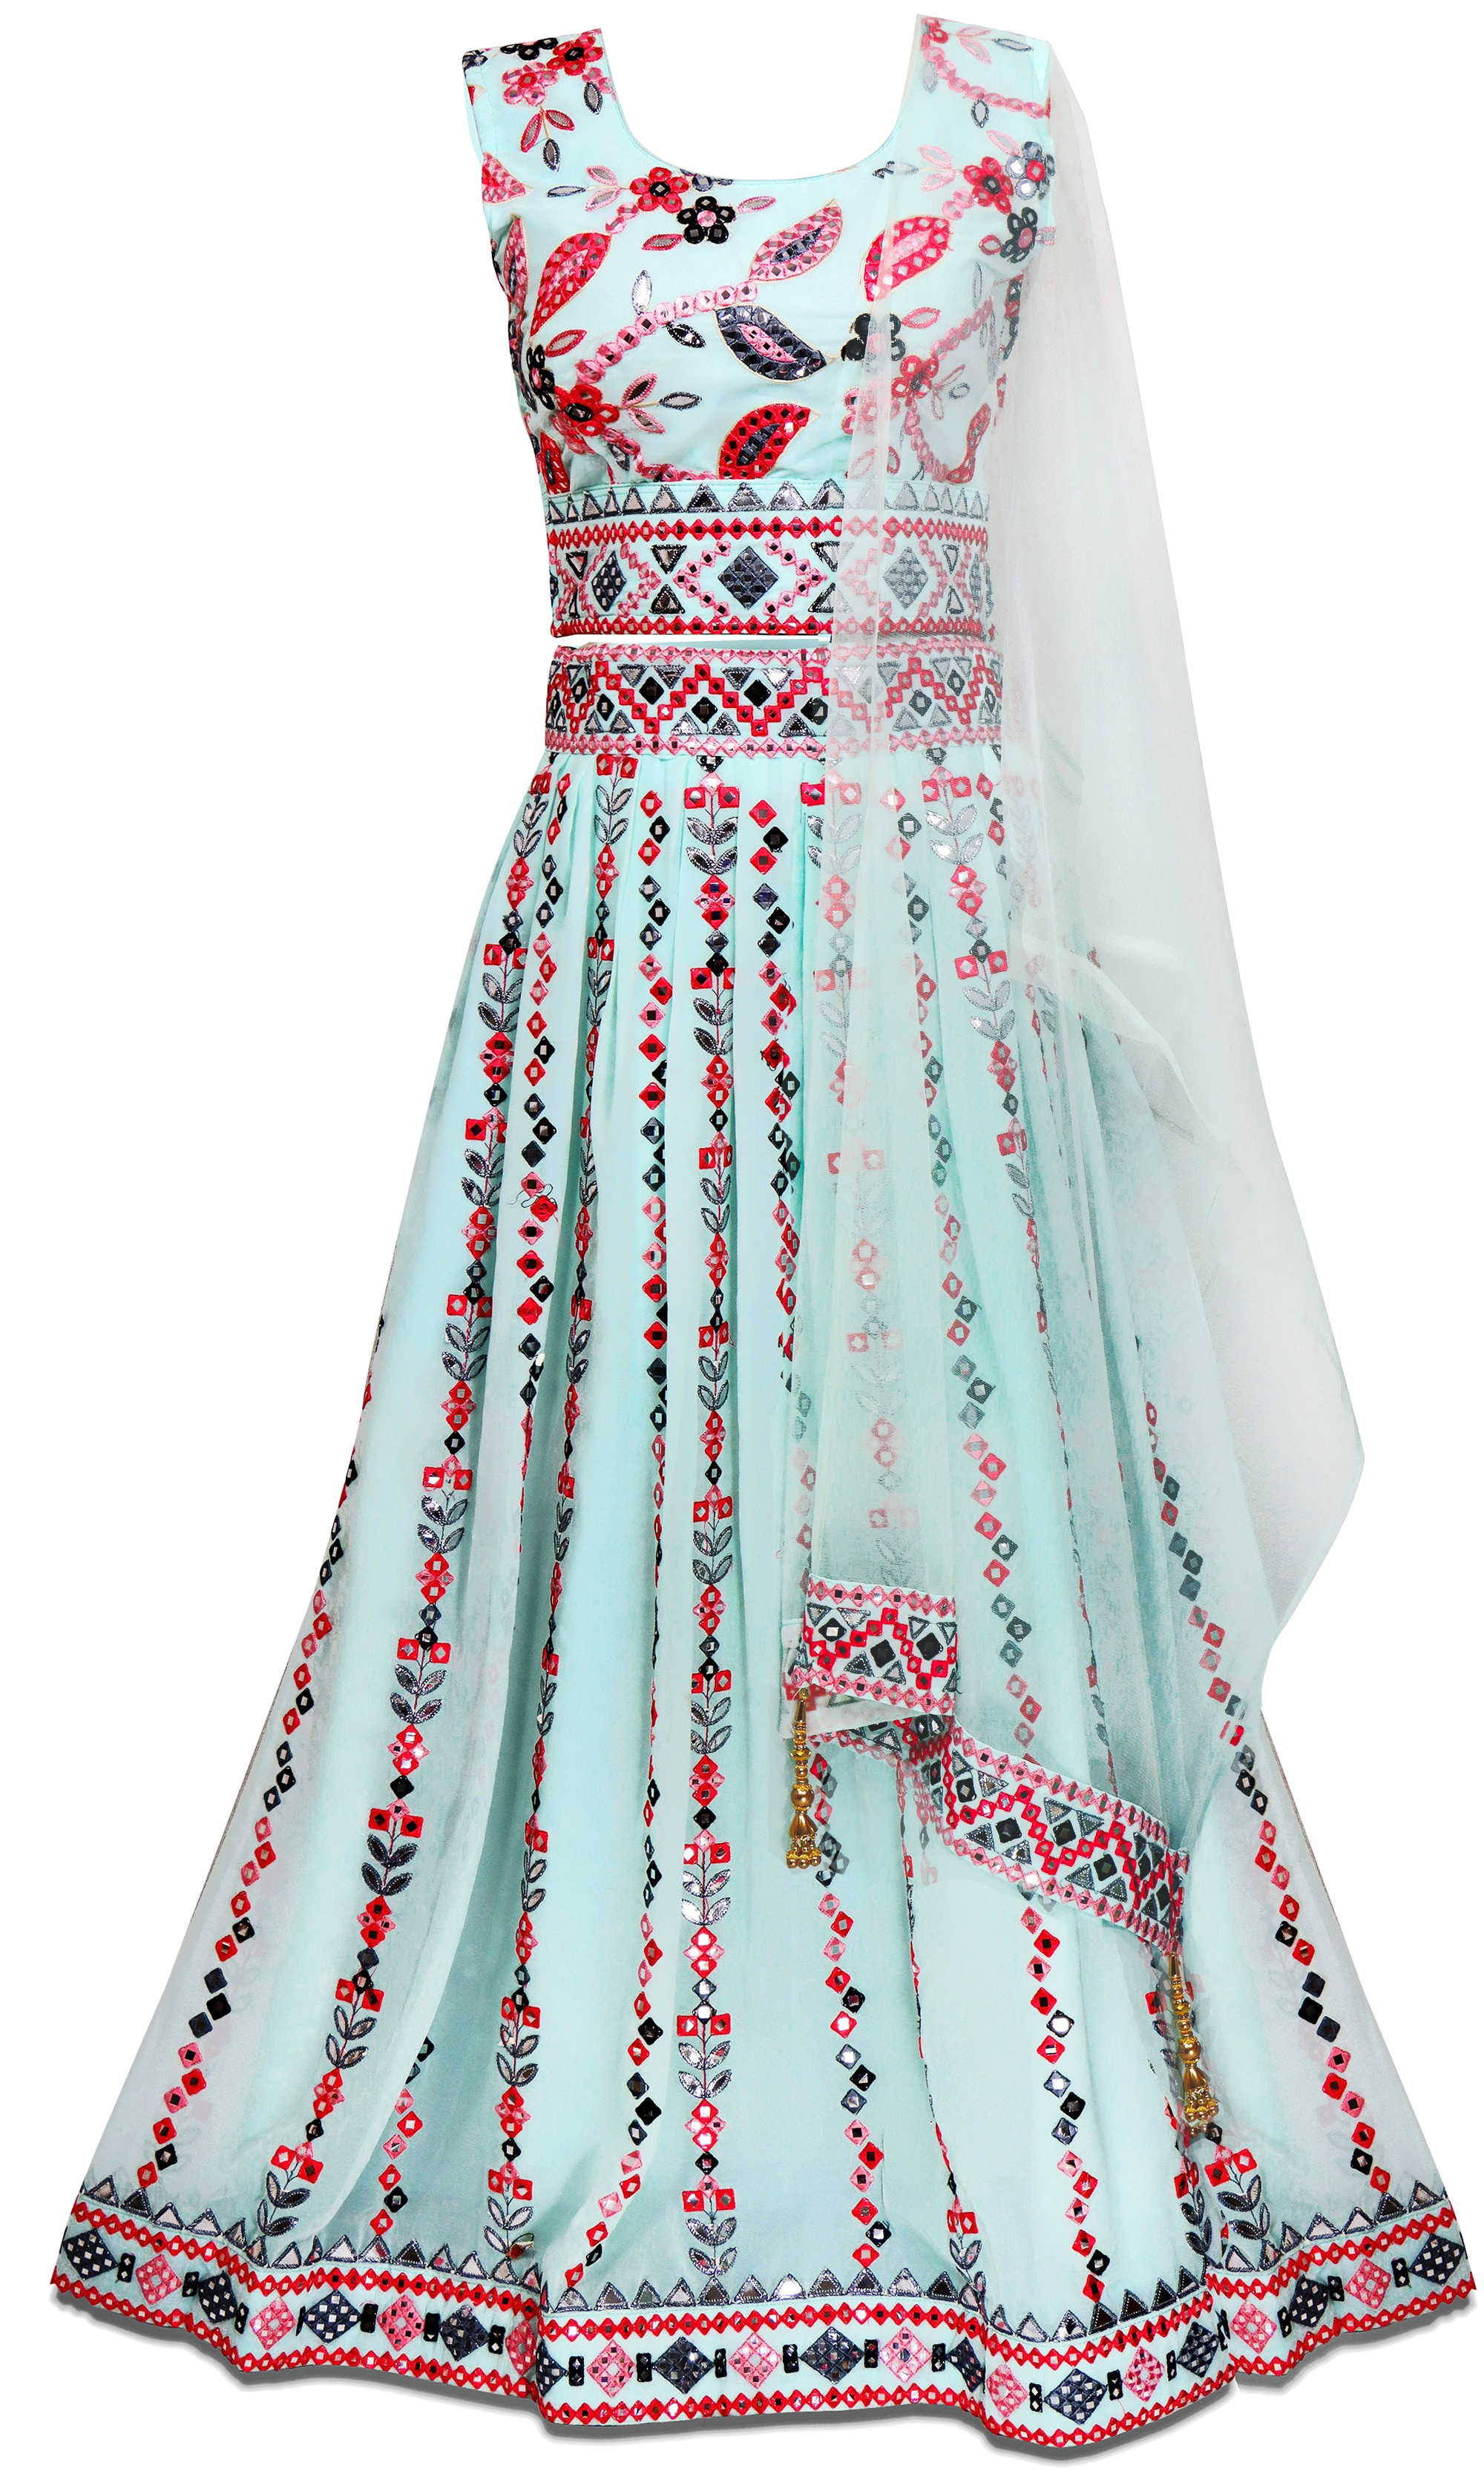 Pre-stitched Aquarius sky blue Lehenga with red & black threadwork all over.